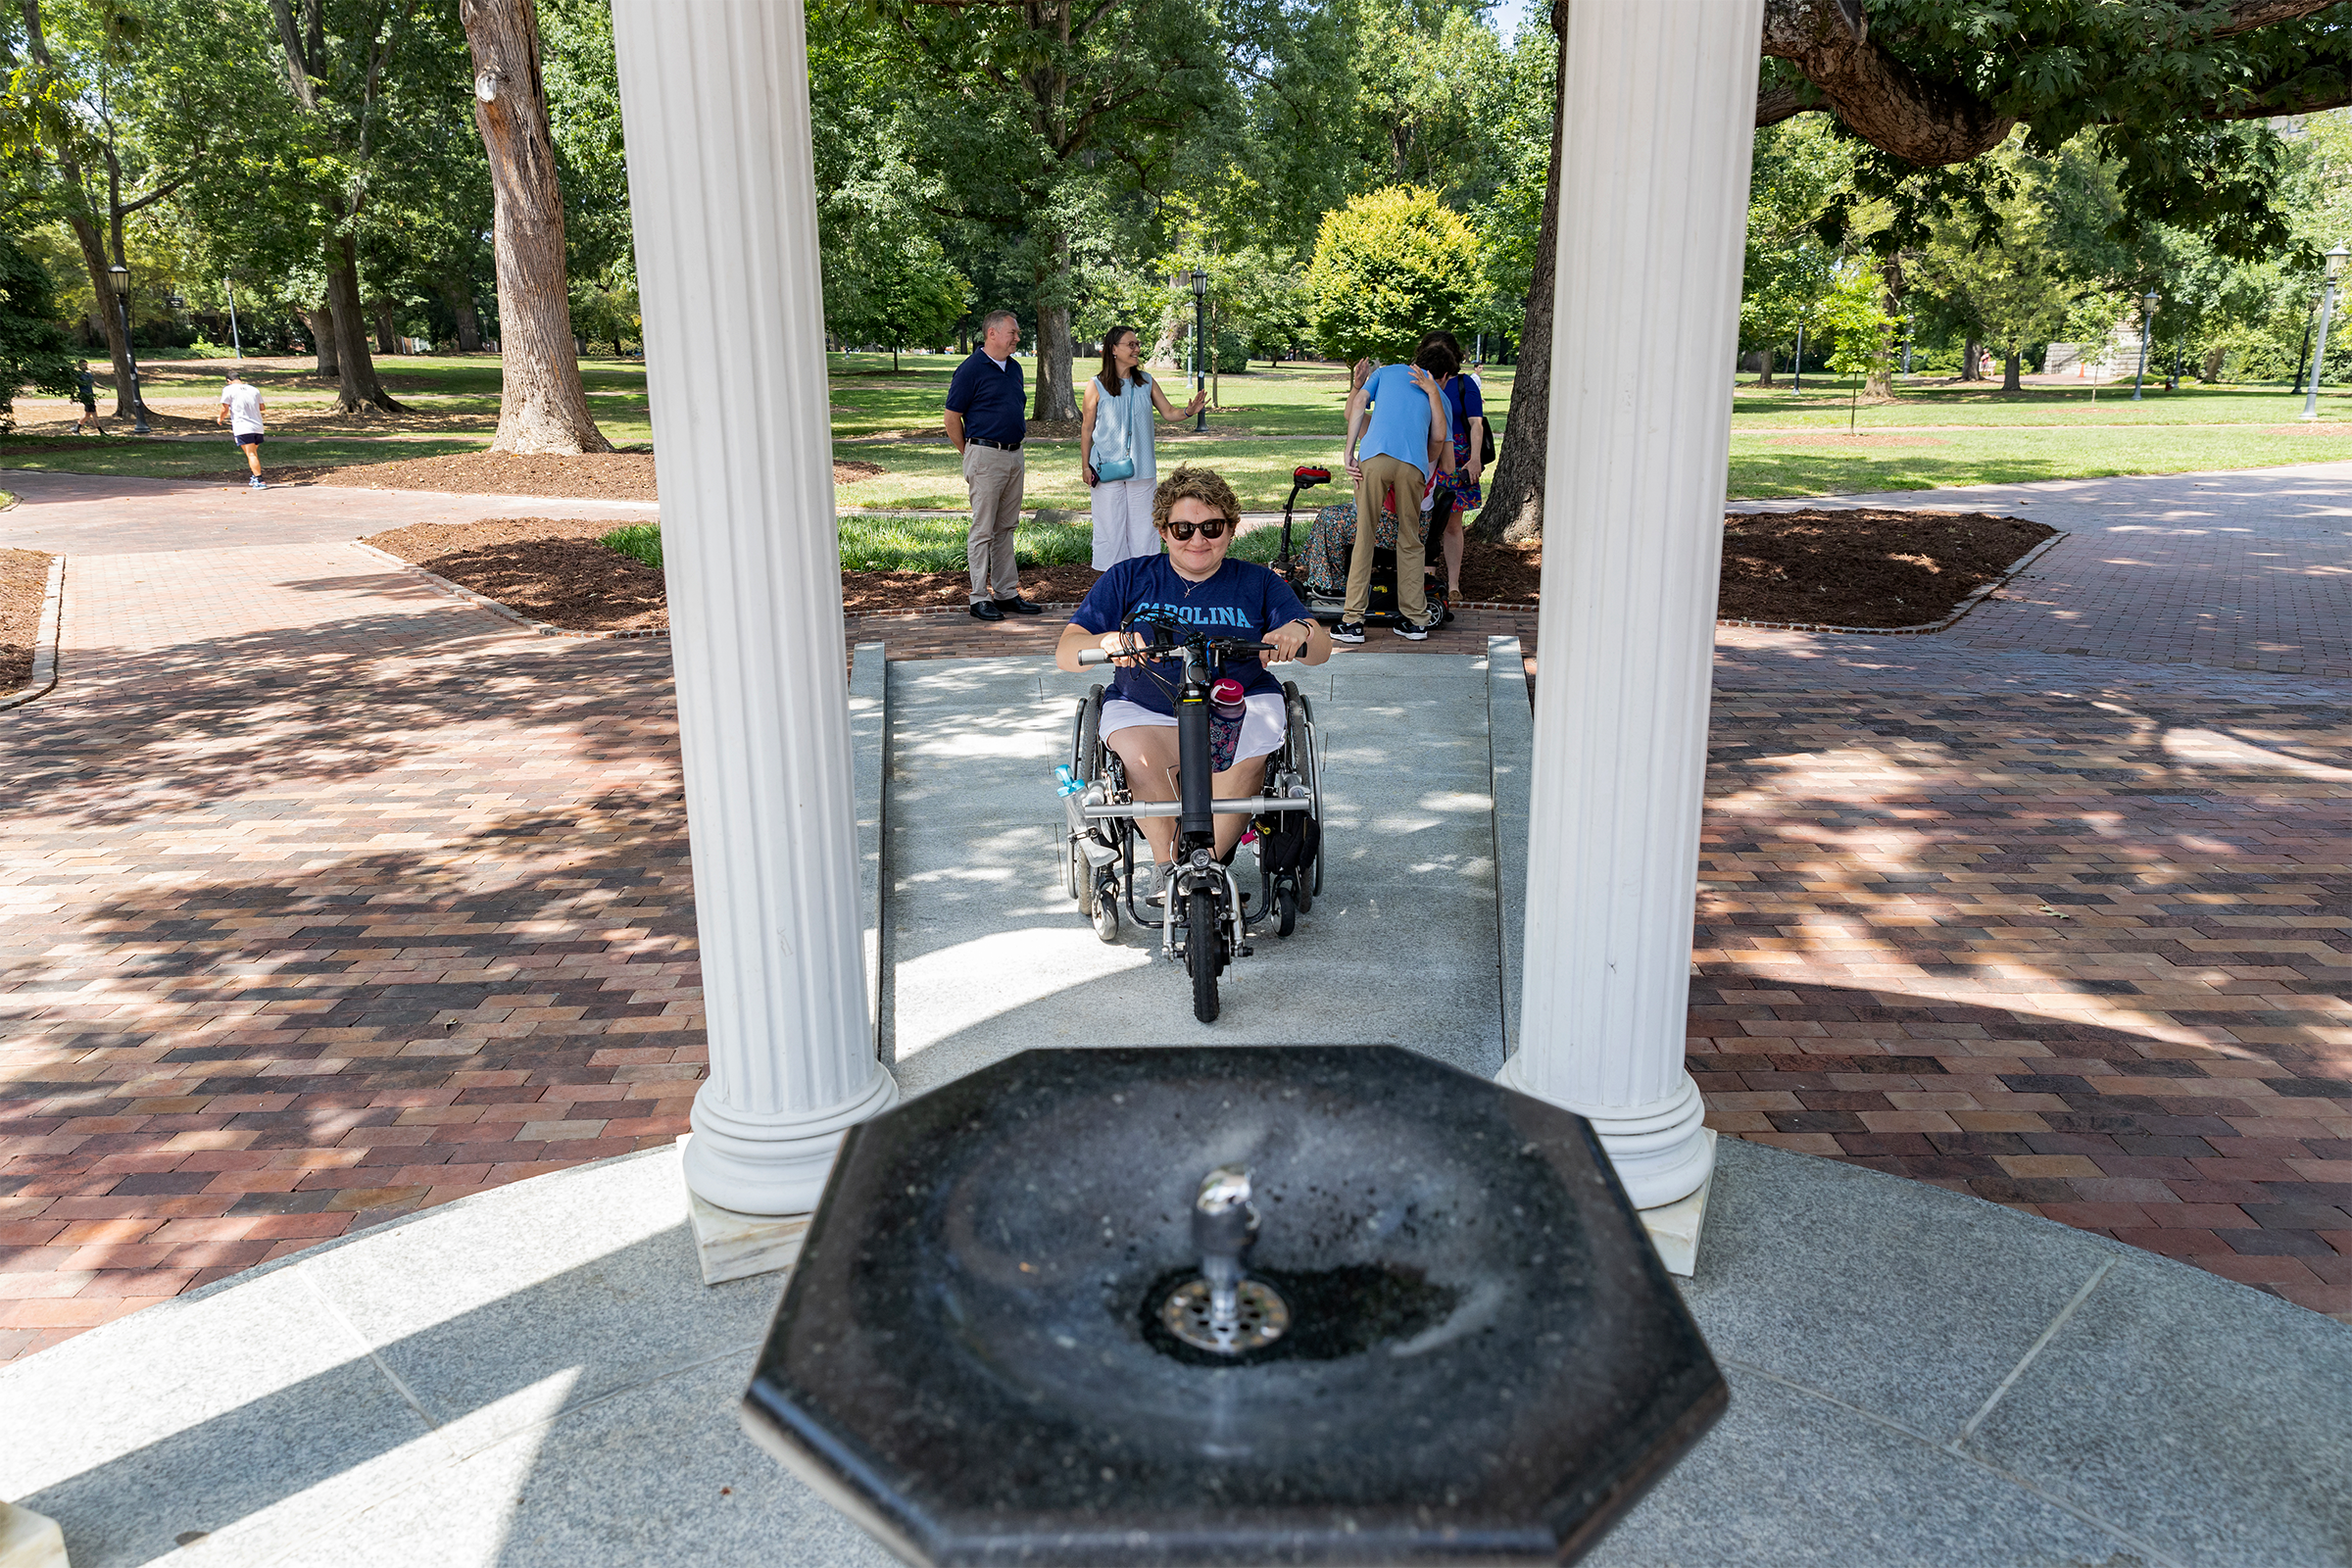 A person using a wheelchair on a sloped pathway approaches the fountain of the Old Well on the campus of UNC-Chapel Hill.